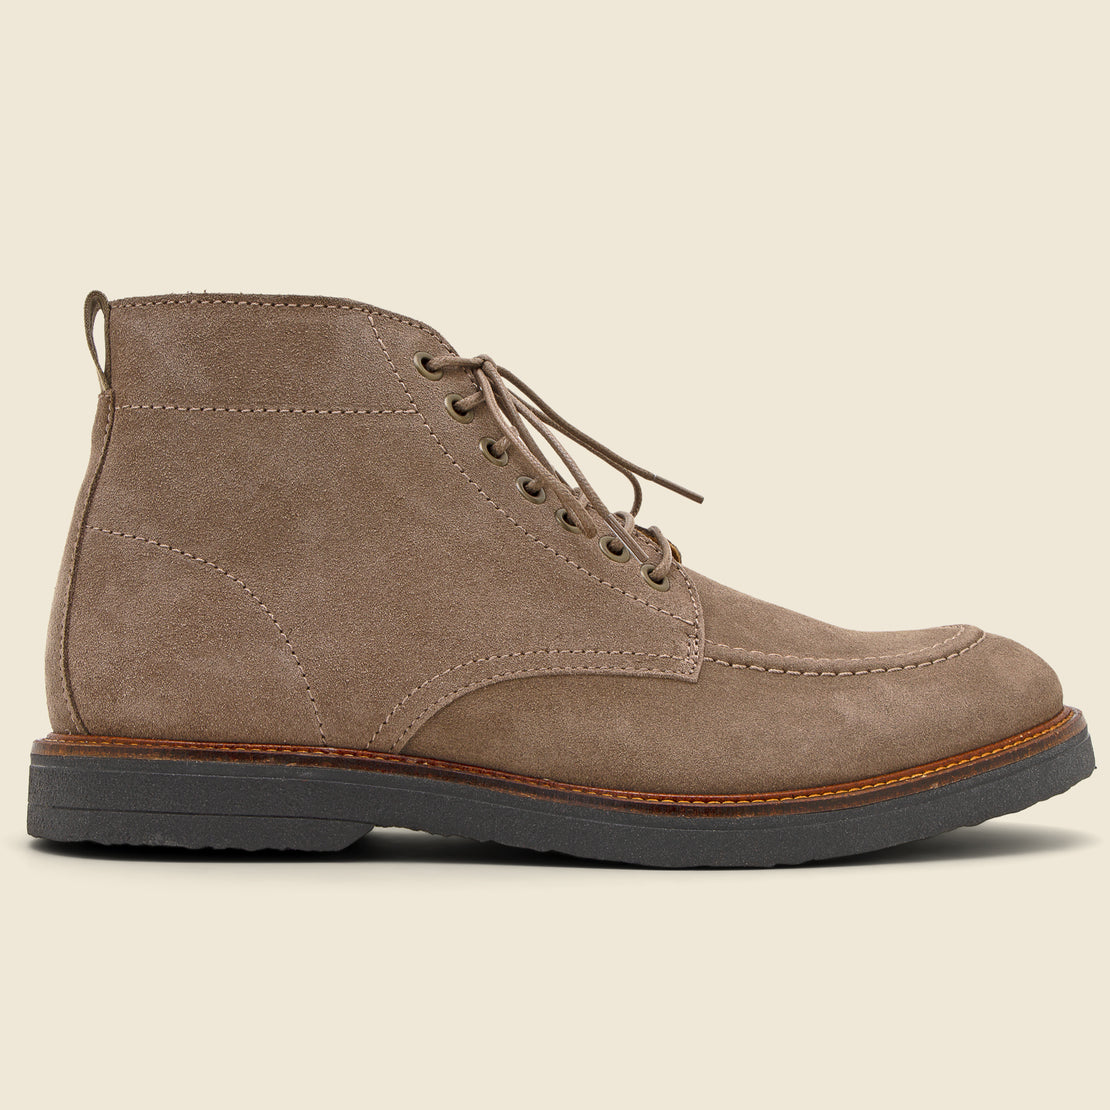 Shoe the Bear Kip Suede Apron Boot - Taupe